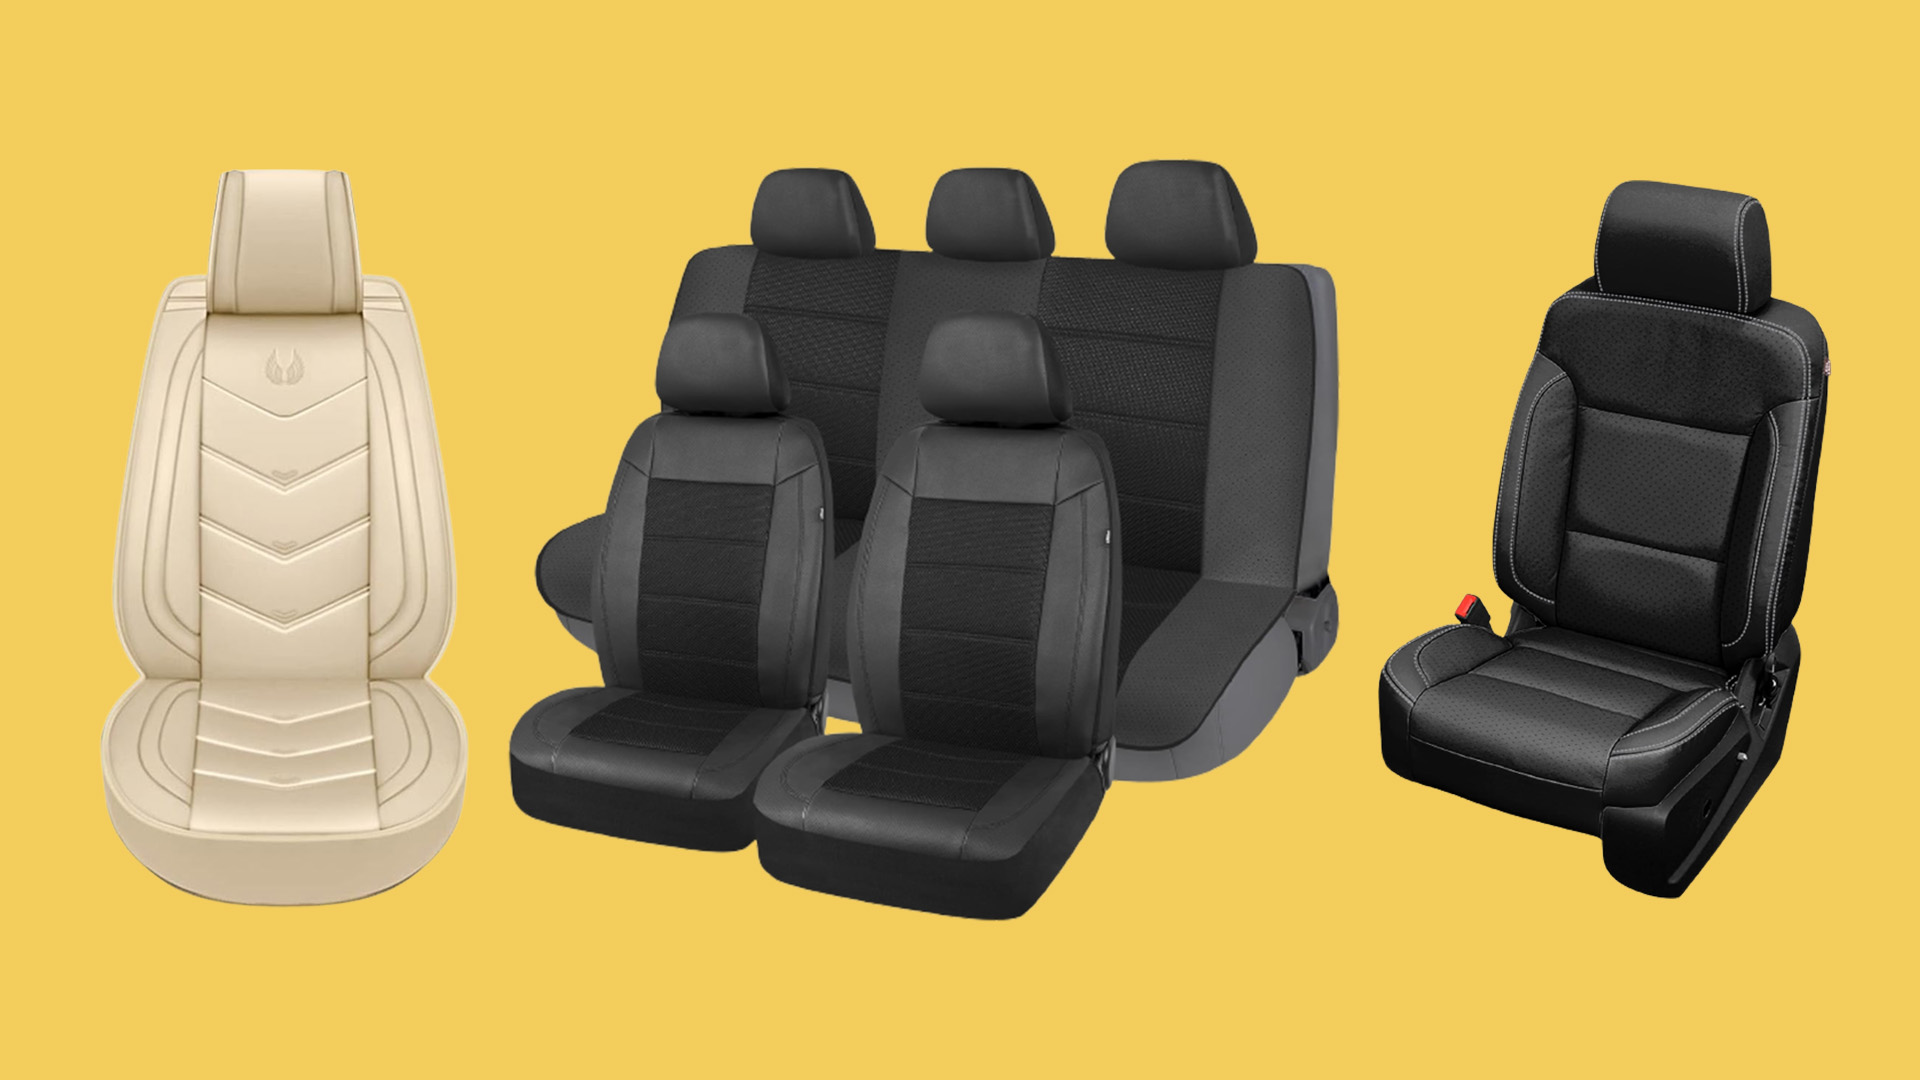 https://www.thedrive.com/uploads/2023/11/02/THEBESTSEATCOVERS.jpg?auto=webp